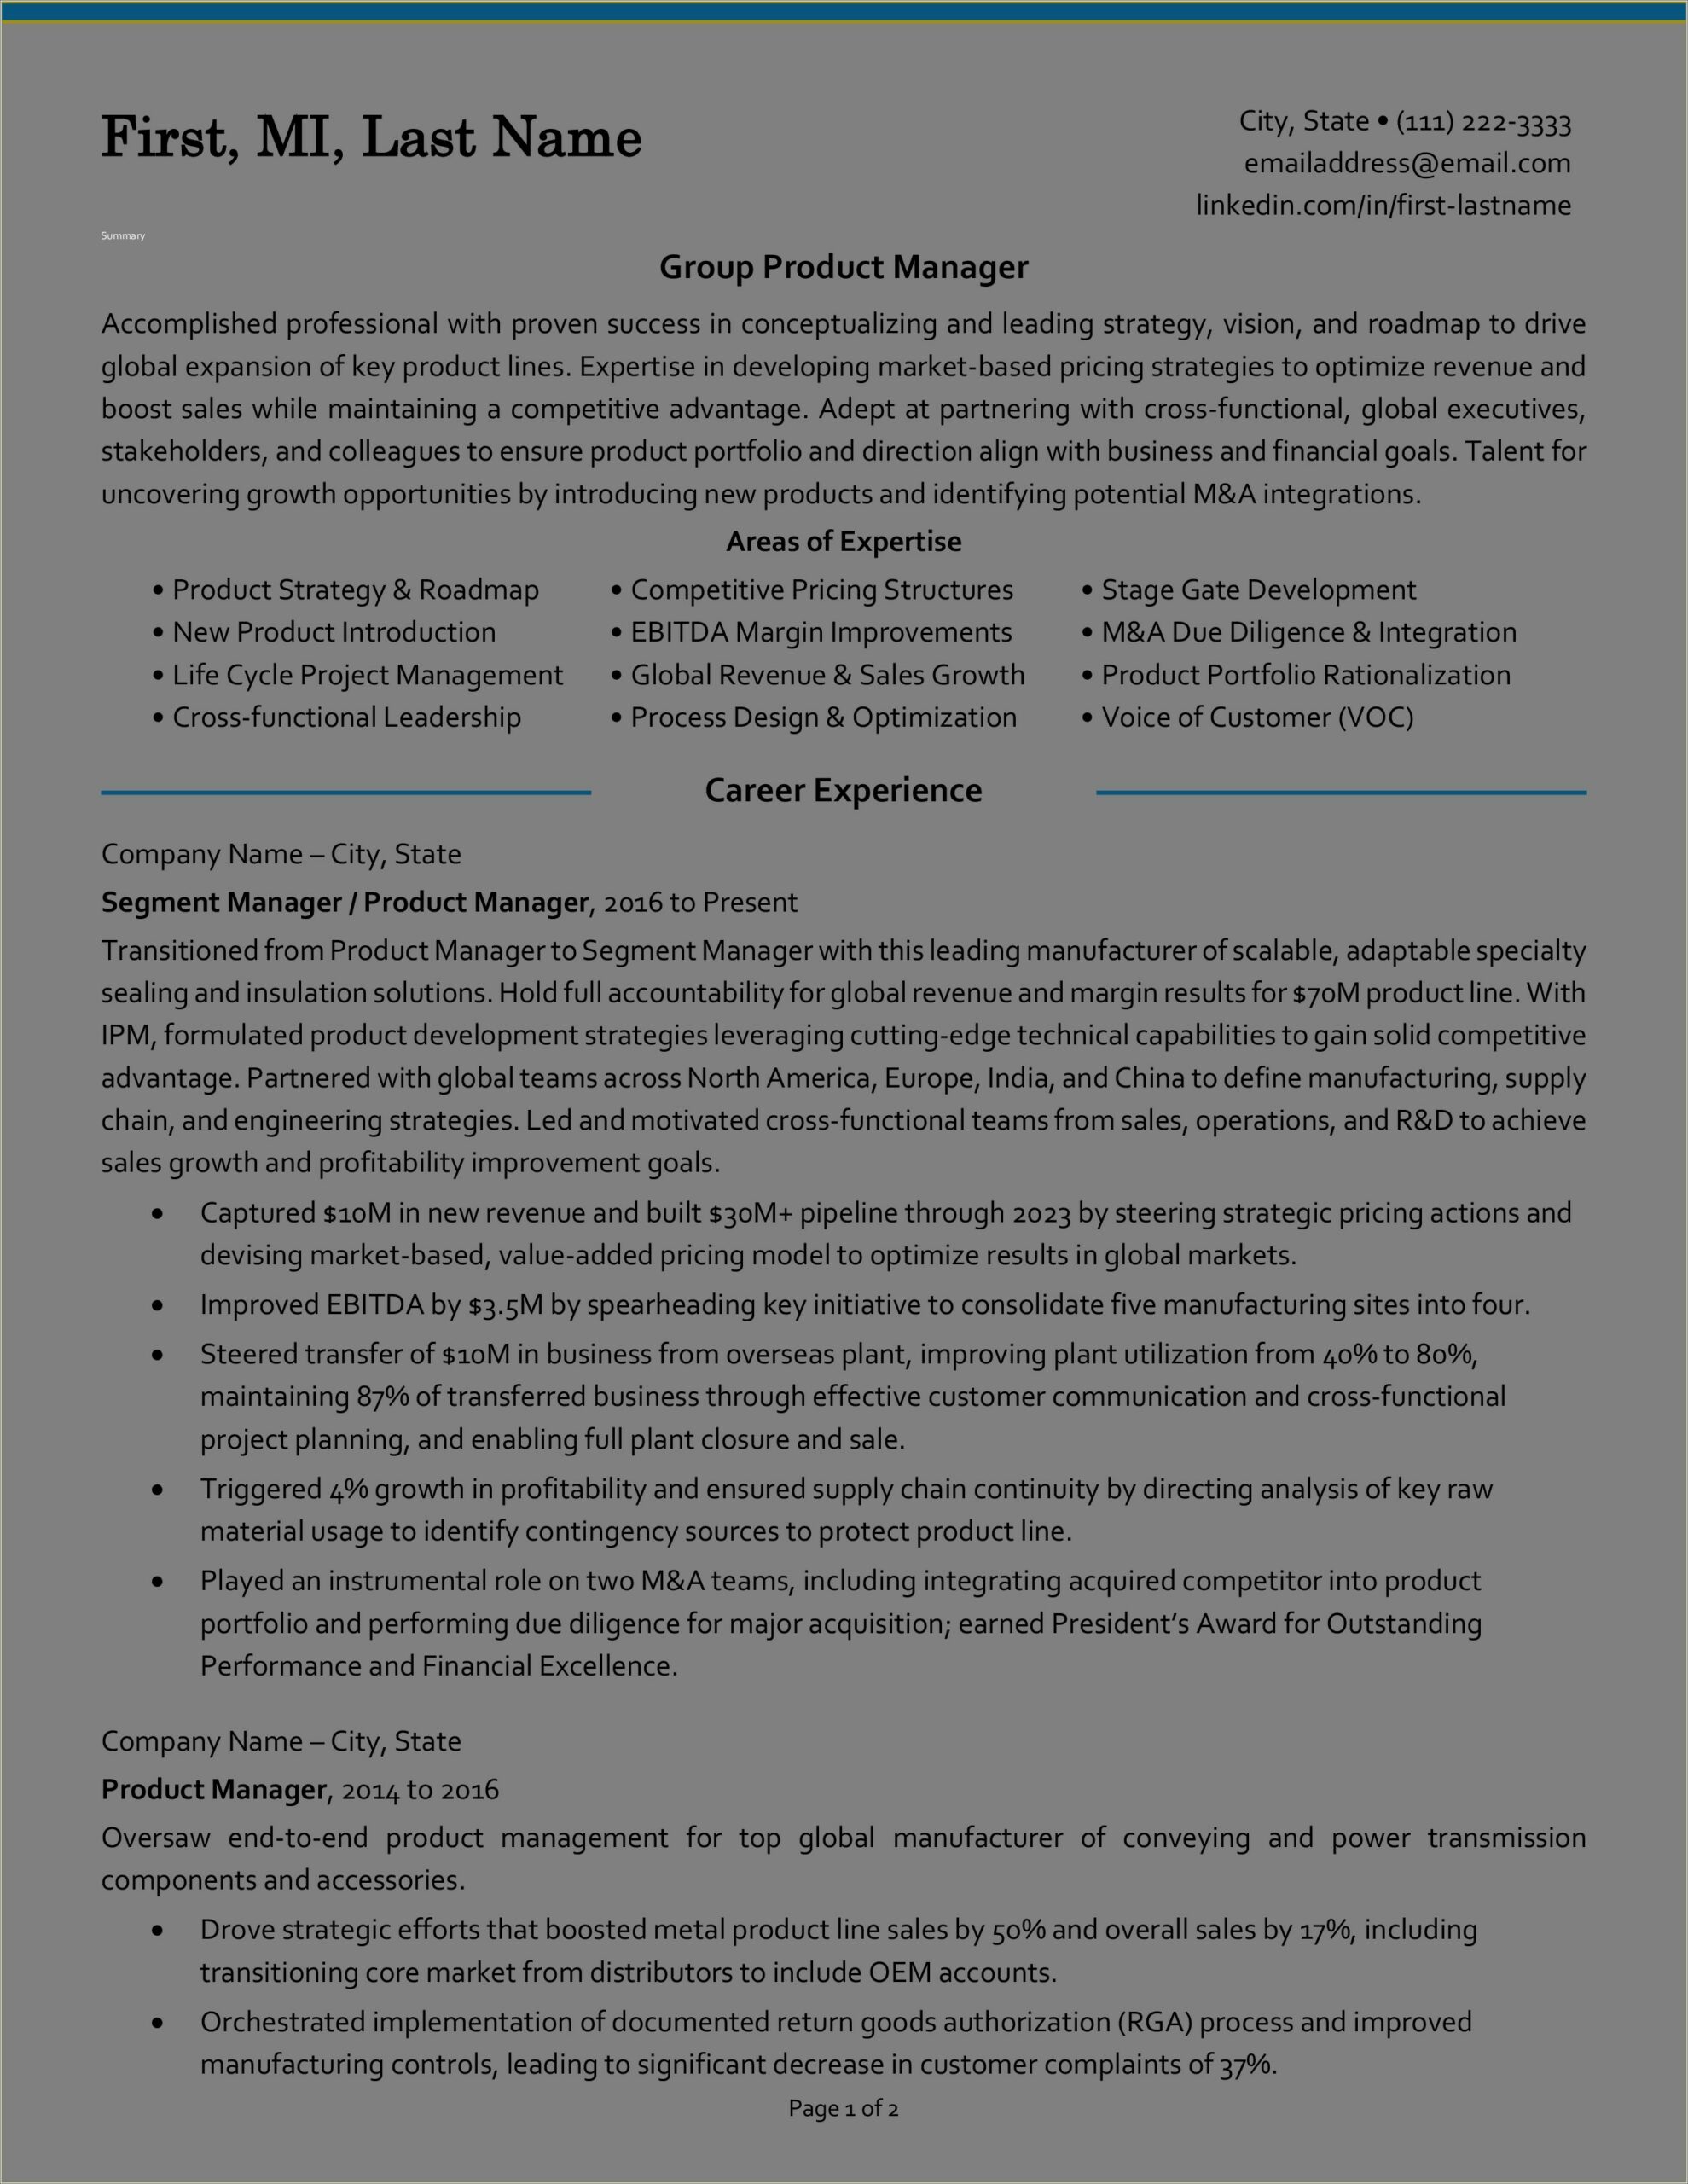 Sample Resume Template For Experienced Candidate